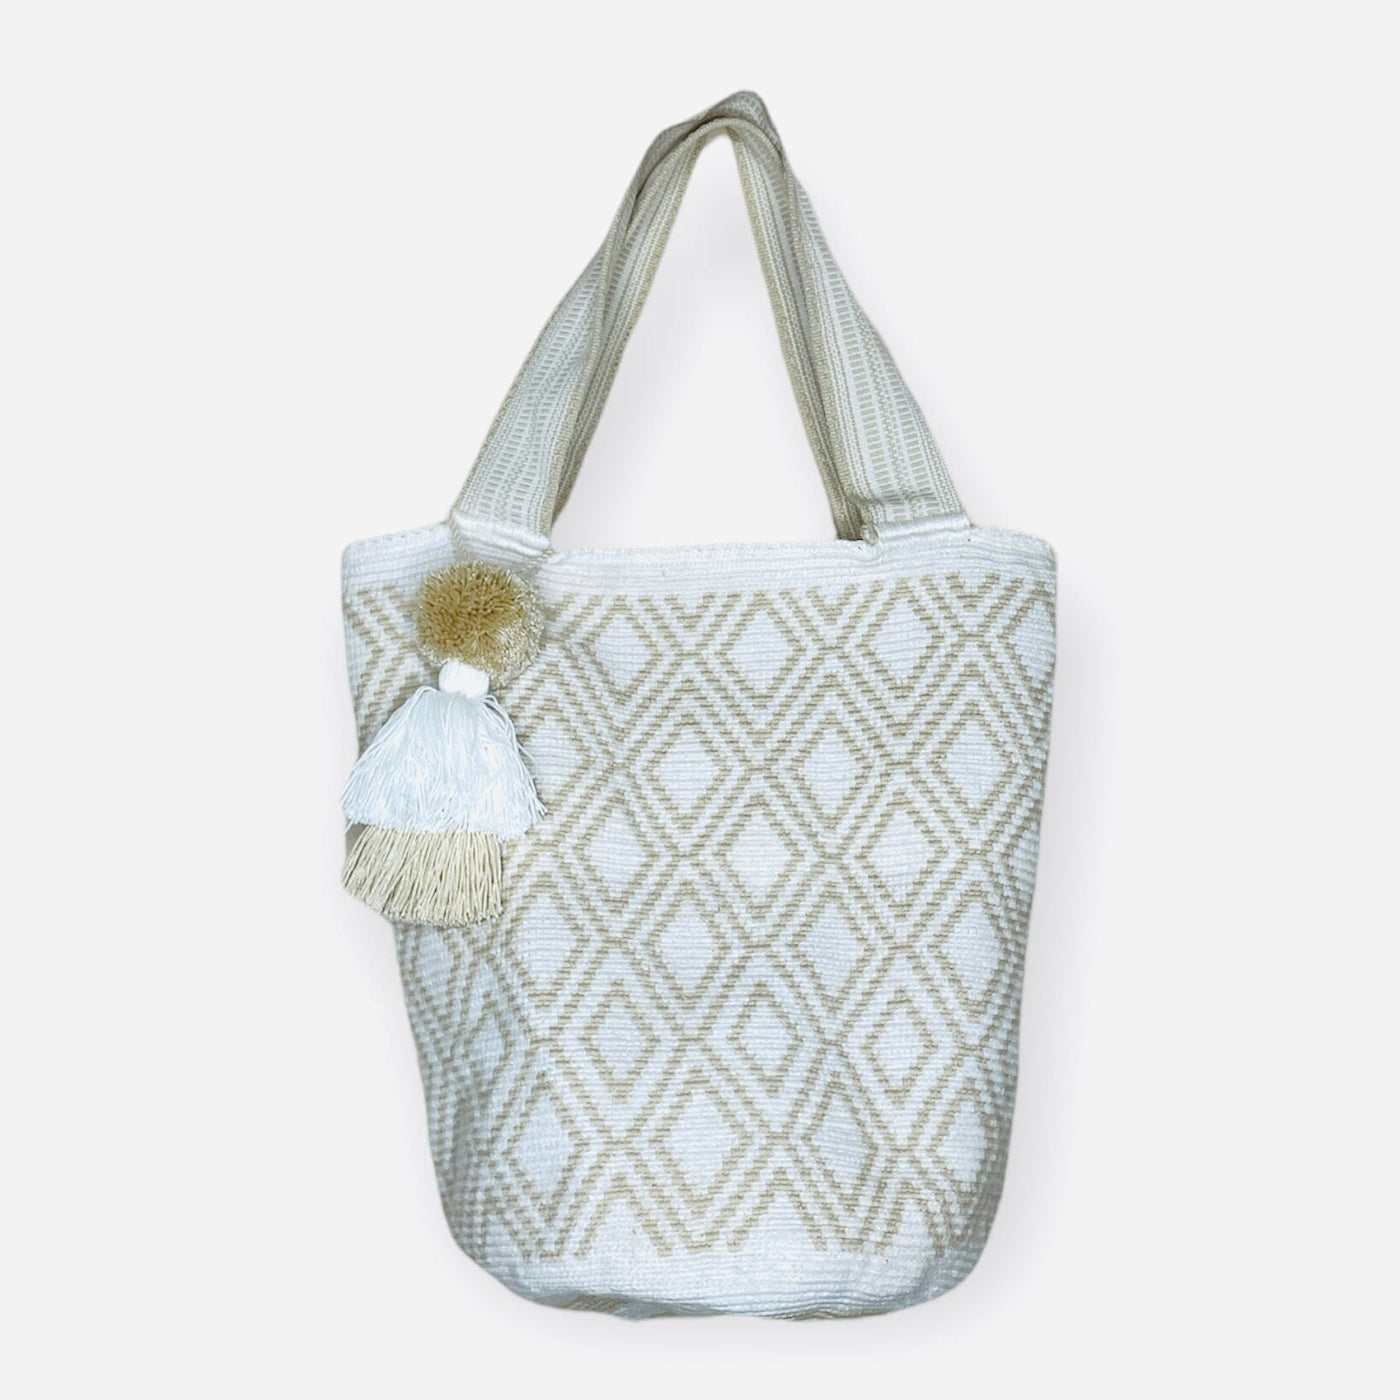 Neutral Colors Maxi Tote Bags | Extra Large Crochet Tote Boho Colors BEACH BAG - CROCHET TOTE BAG White Sands 